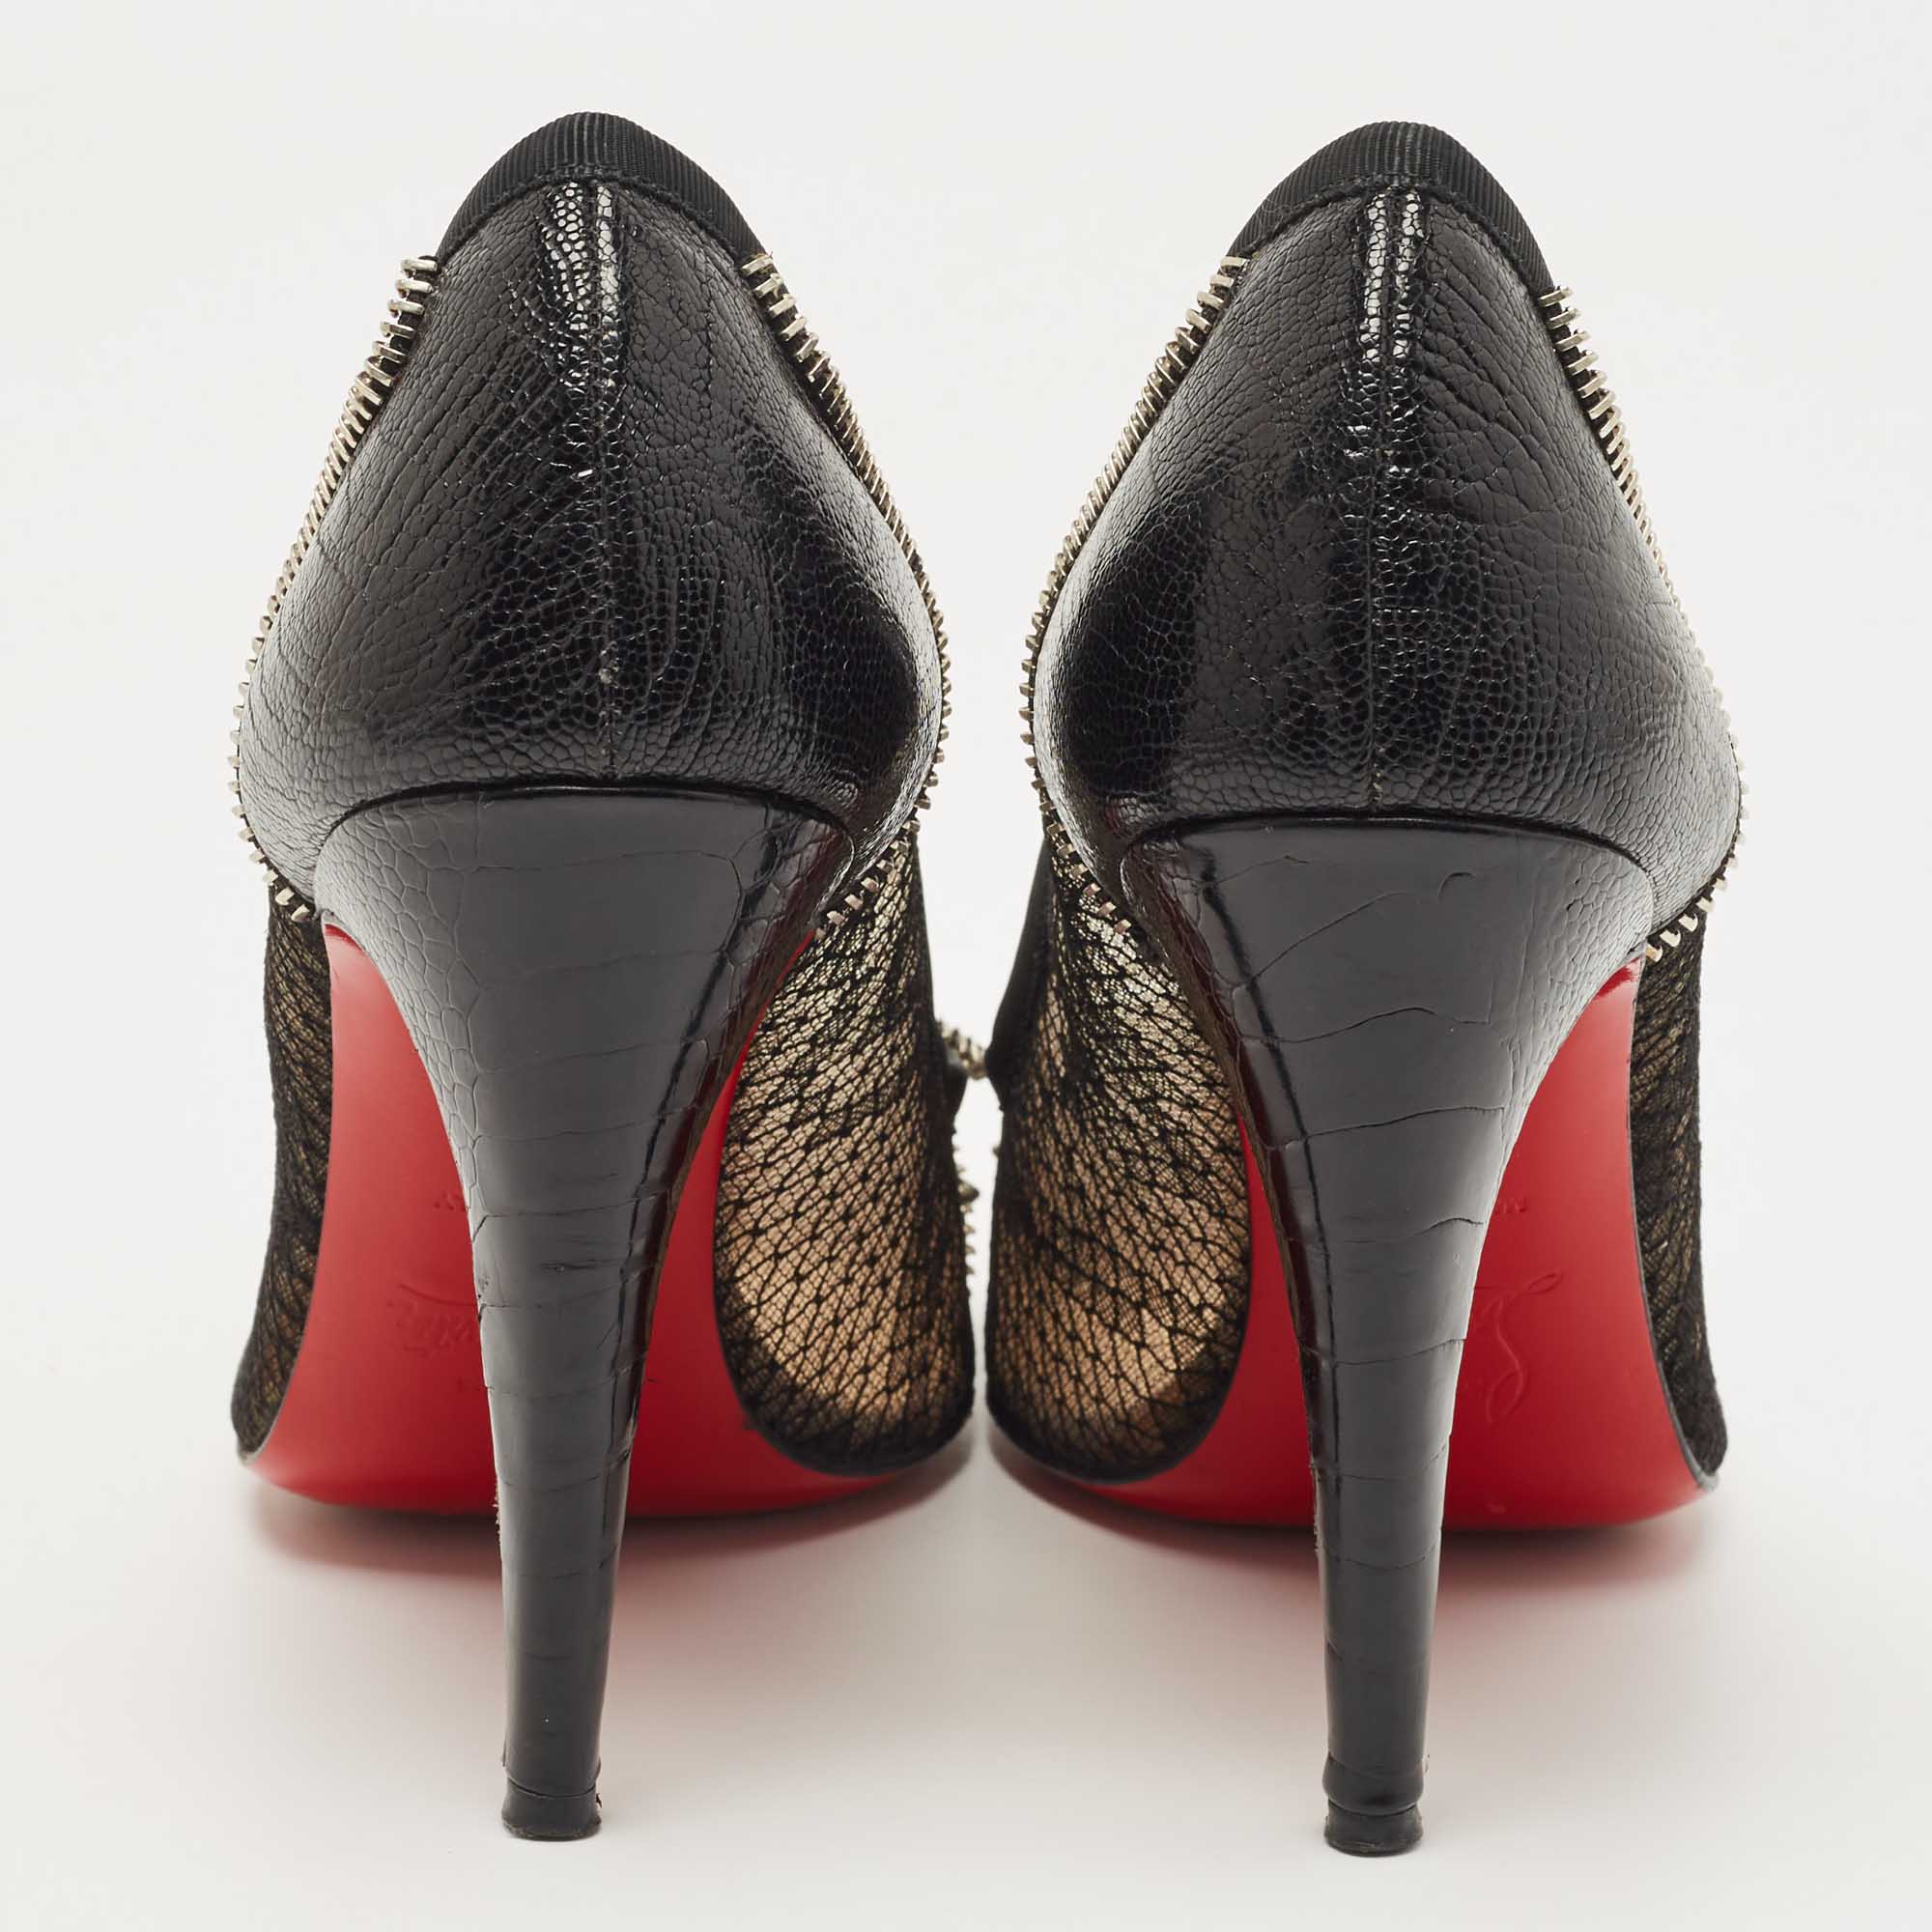 Christian Louboutin Black Leather And Lace Candy Spiked Pumps Size 38